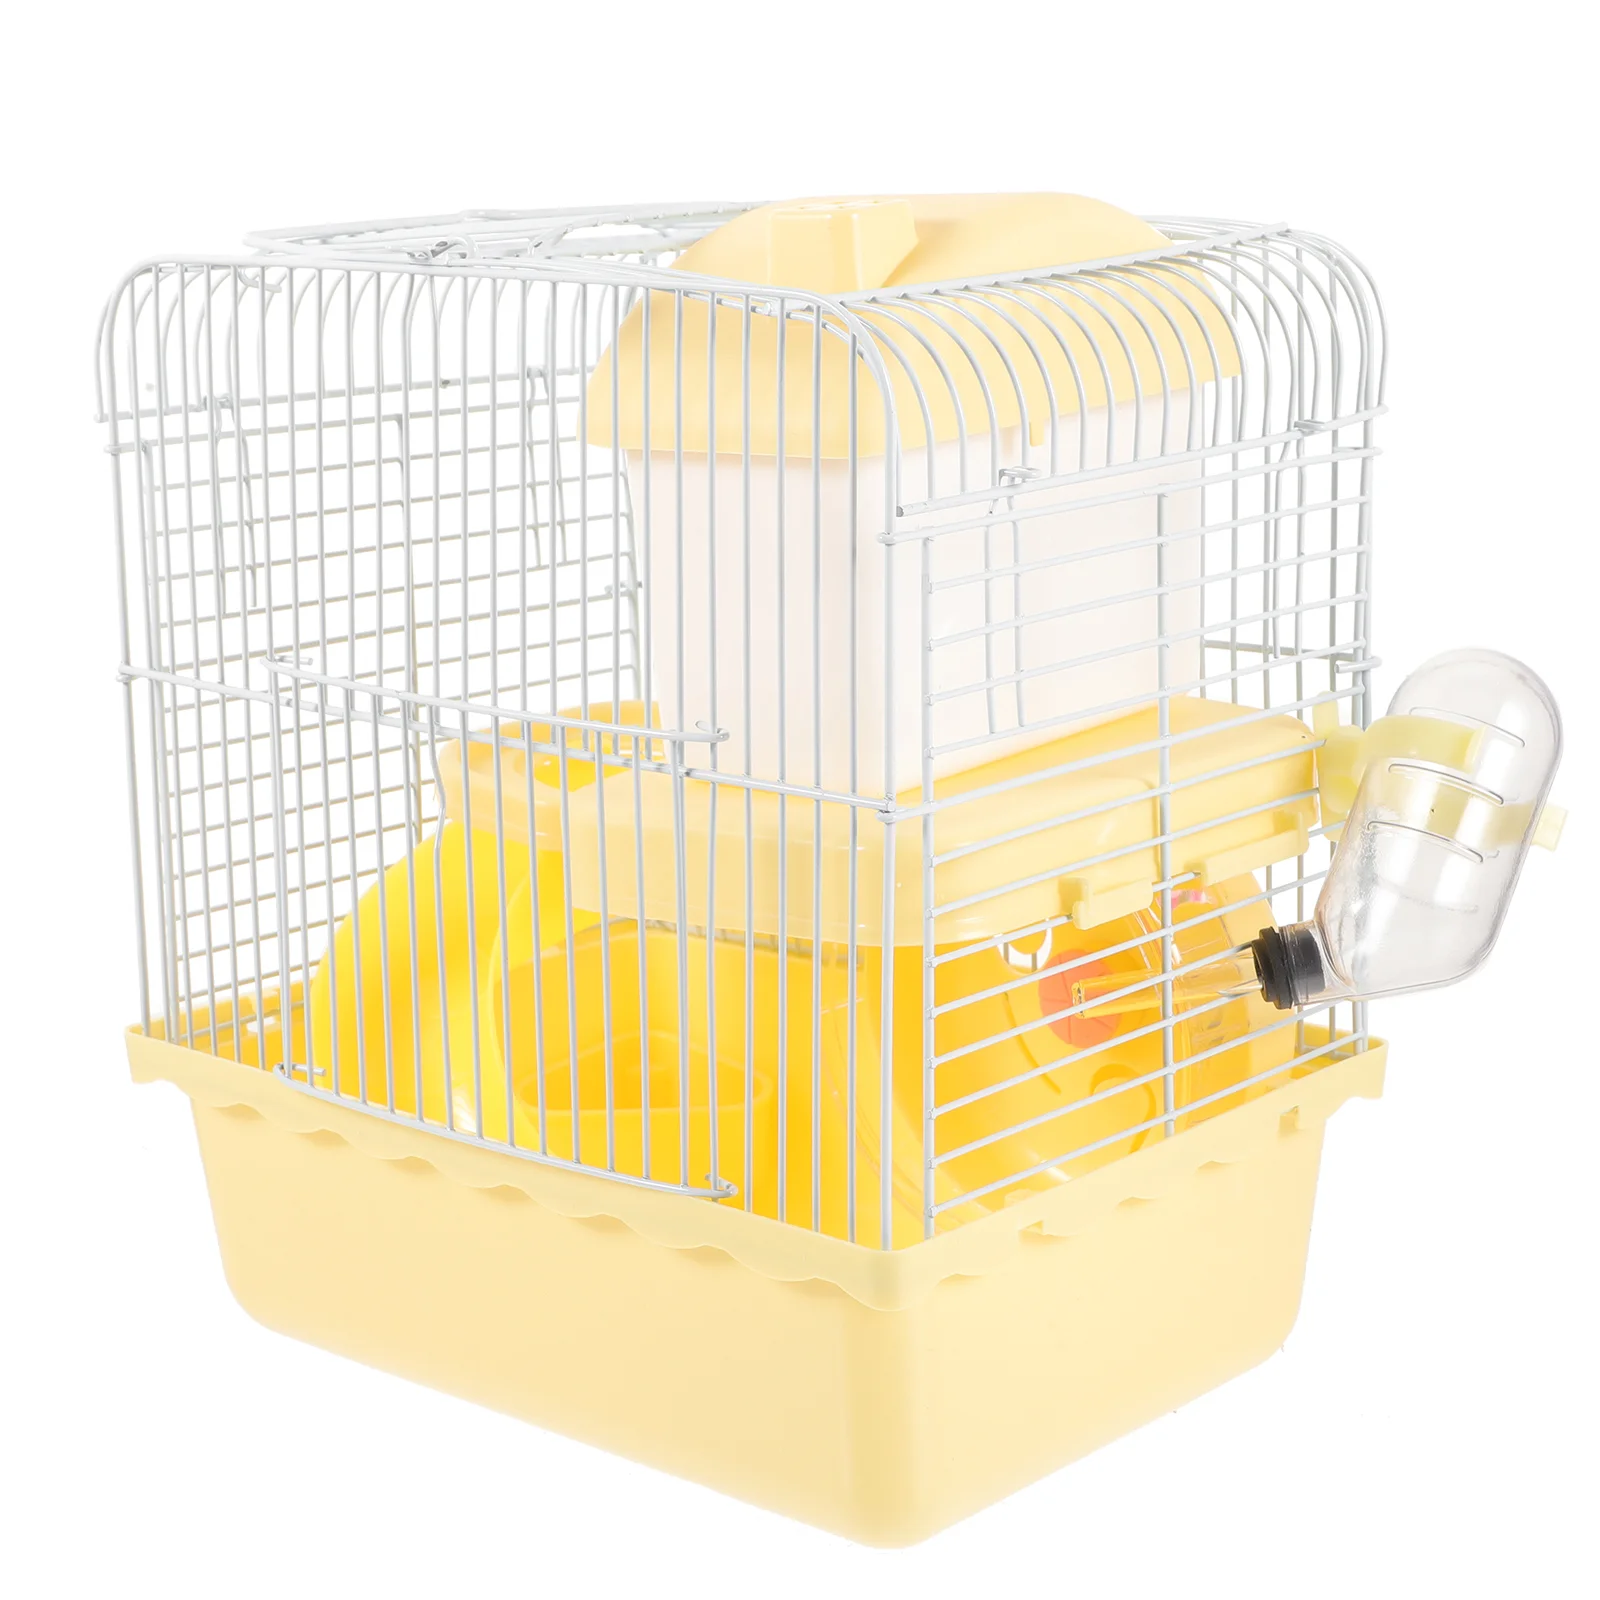 

Cage Guinea Pigs Large Rat Small Pet Hamster Cages Big Plastic Mouse Mice Dwarf Hamsters Wire